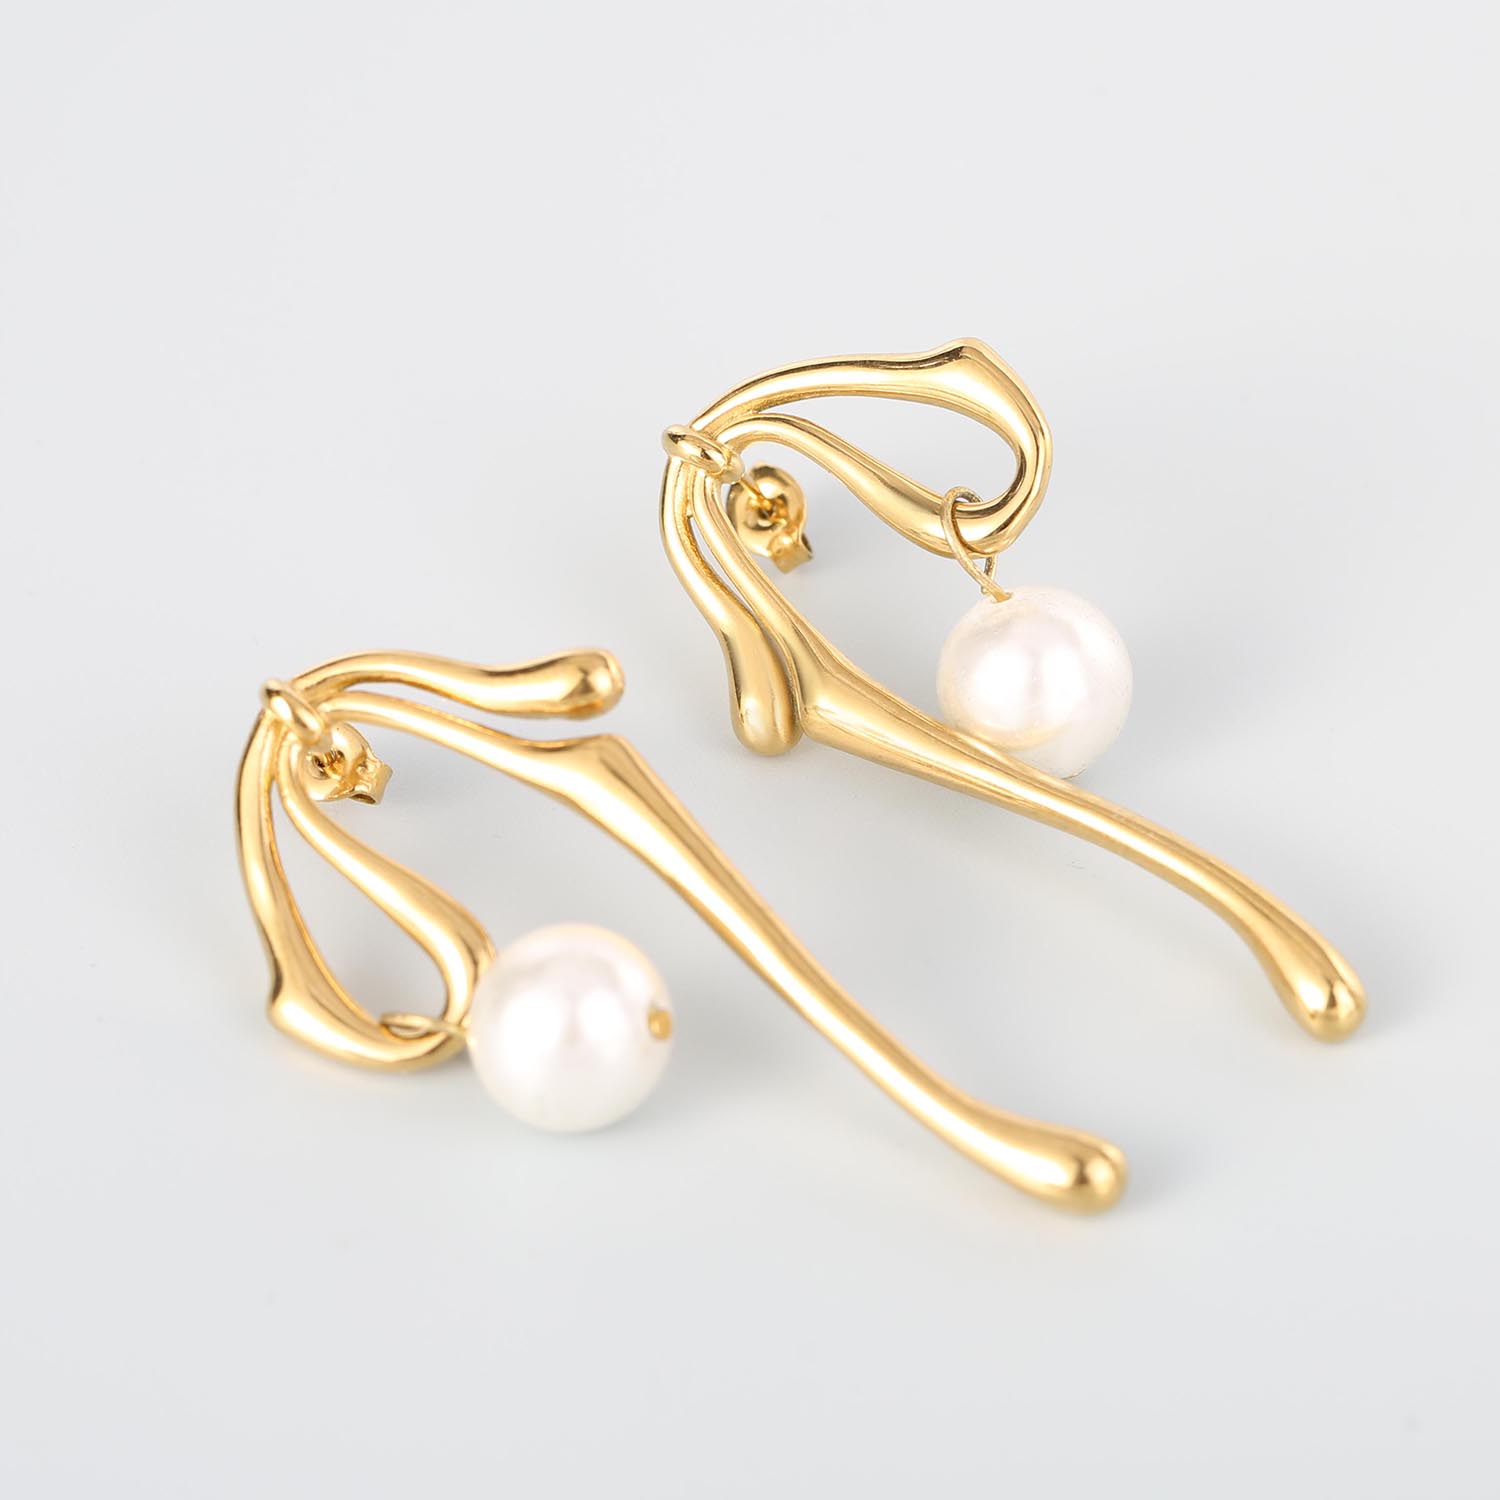 Pearl geometric earrings jewelry retro personality high-end feeling twisted   irregular stainless steel gold-plated earrings